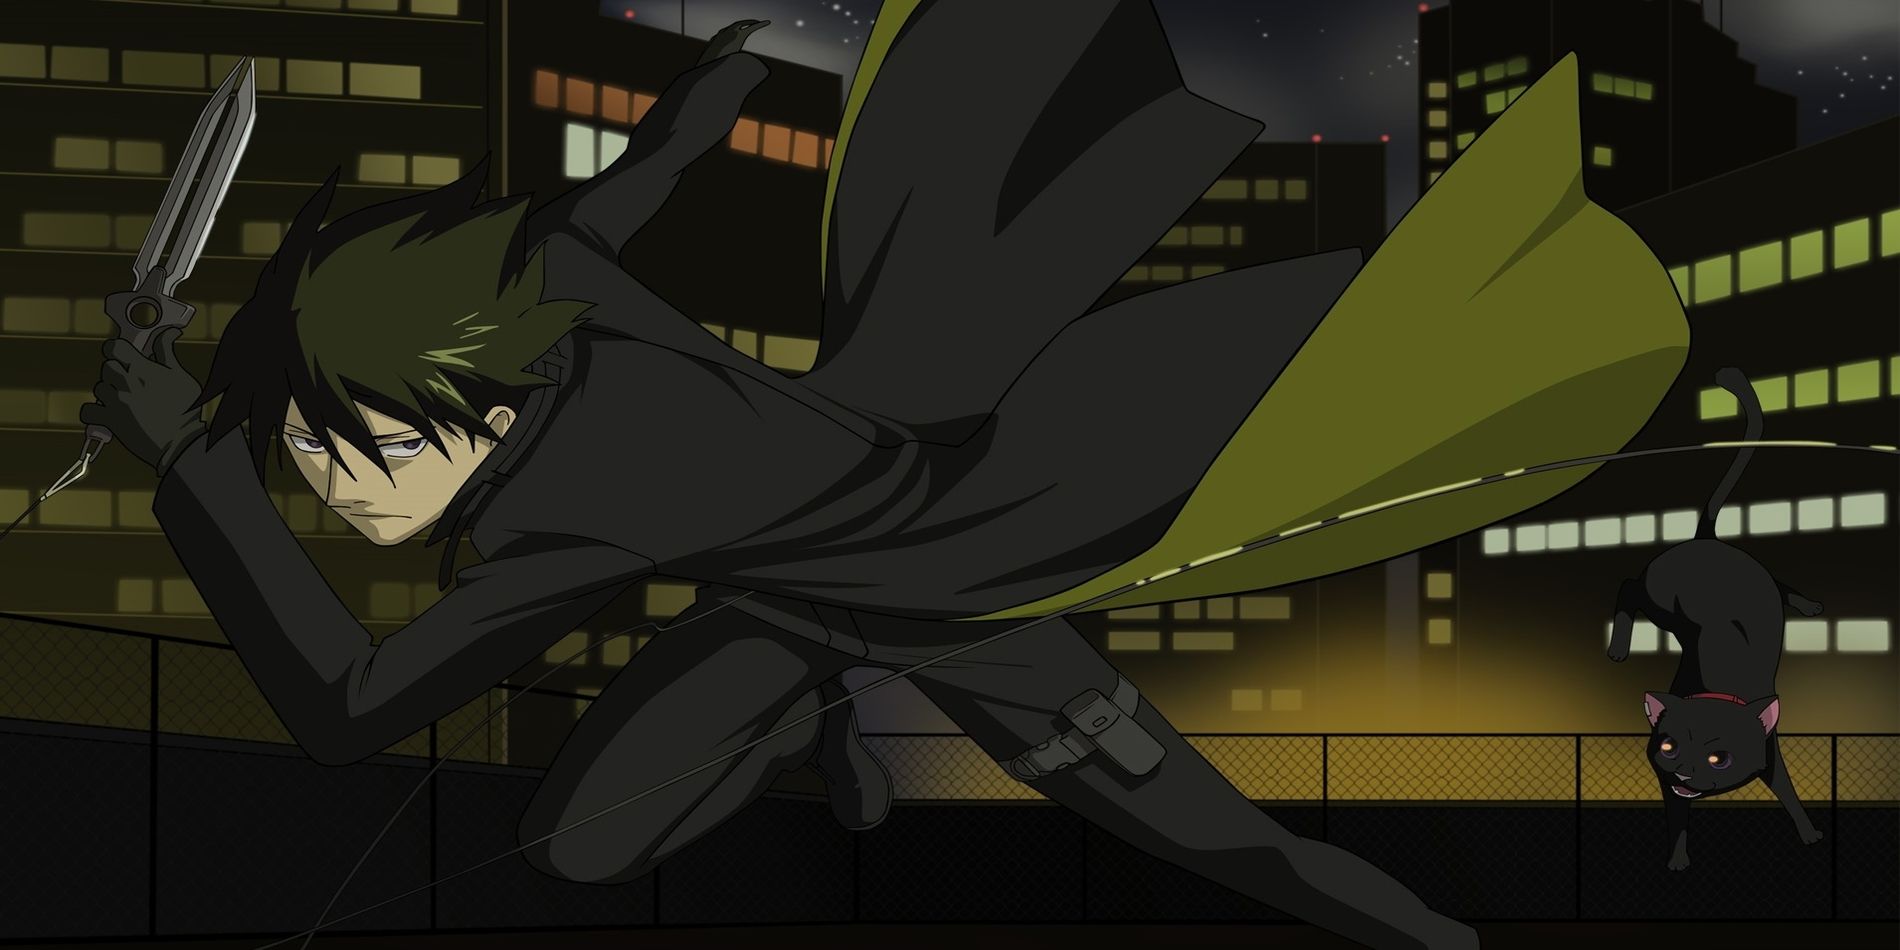 Hei makes dramatic entrance in Darker Than Black Anime